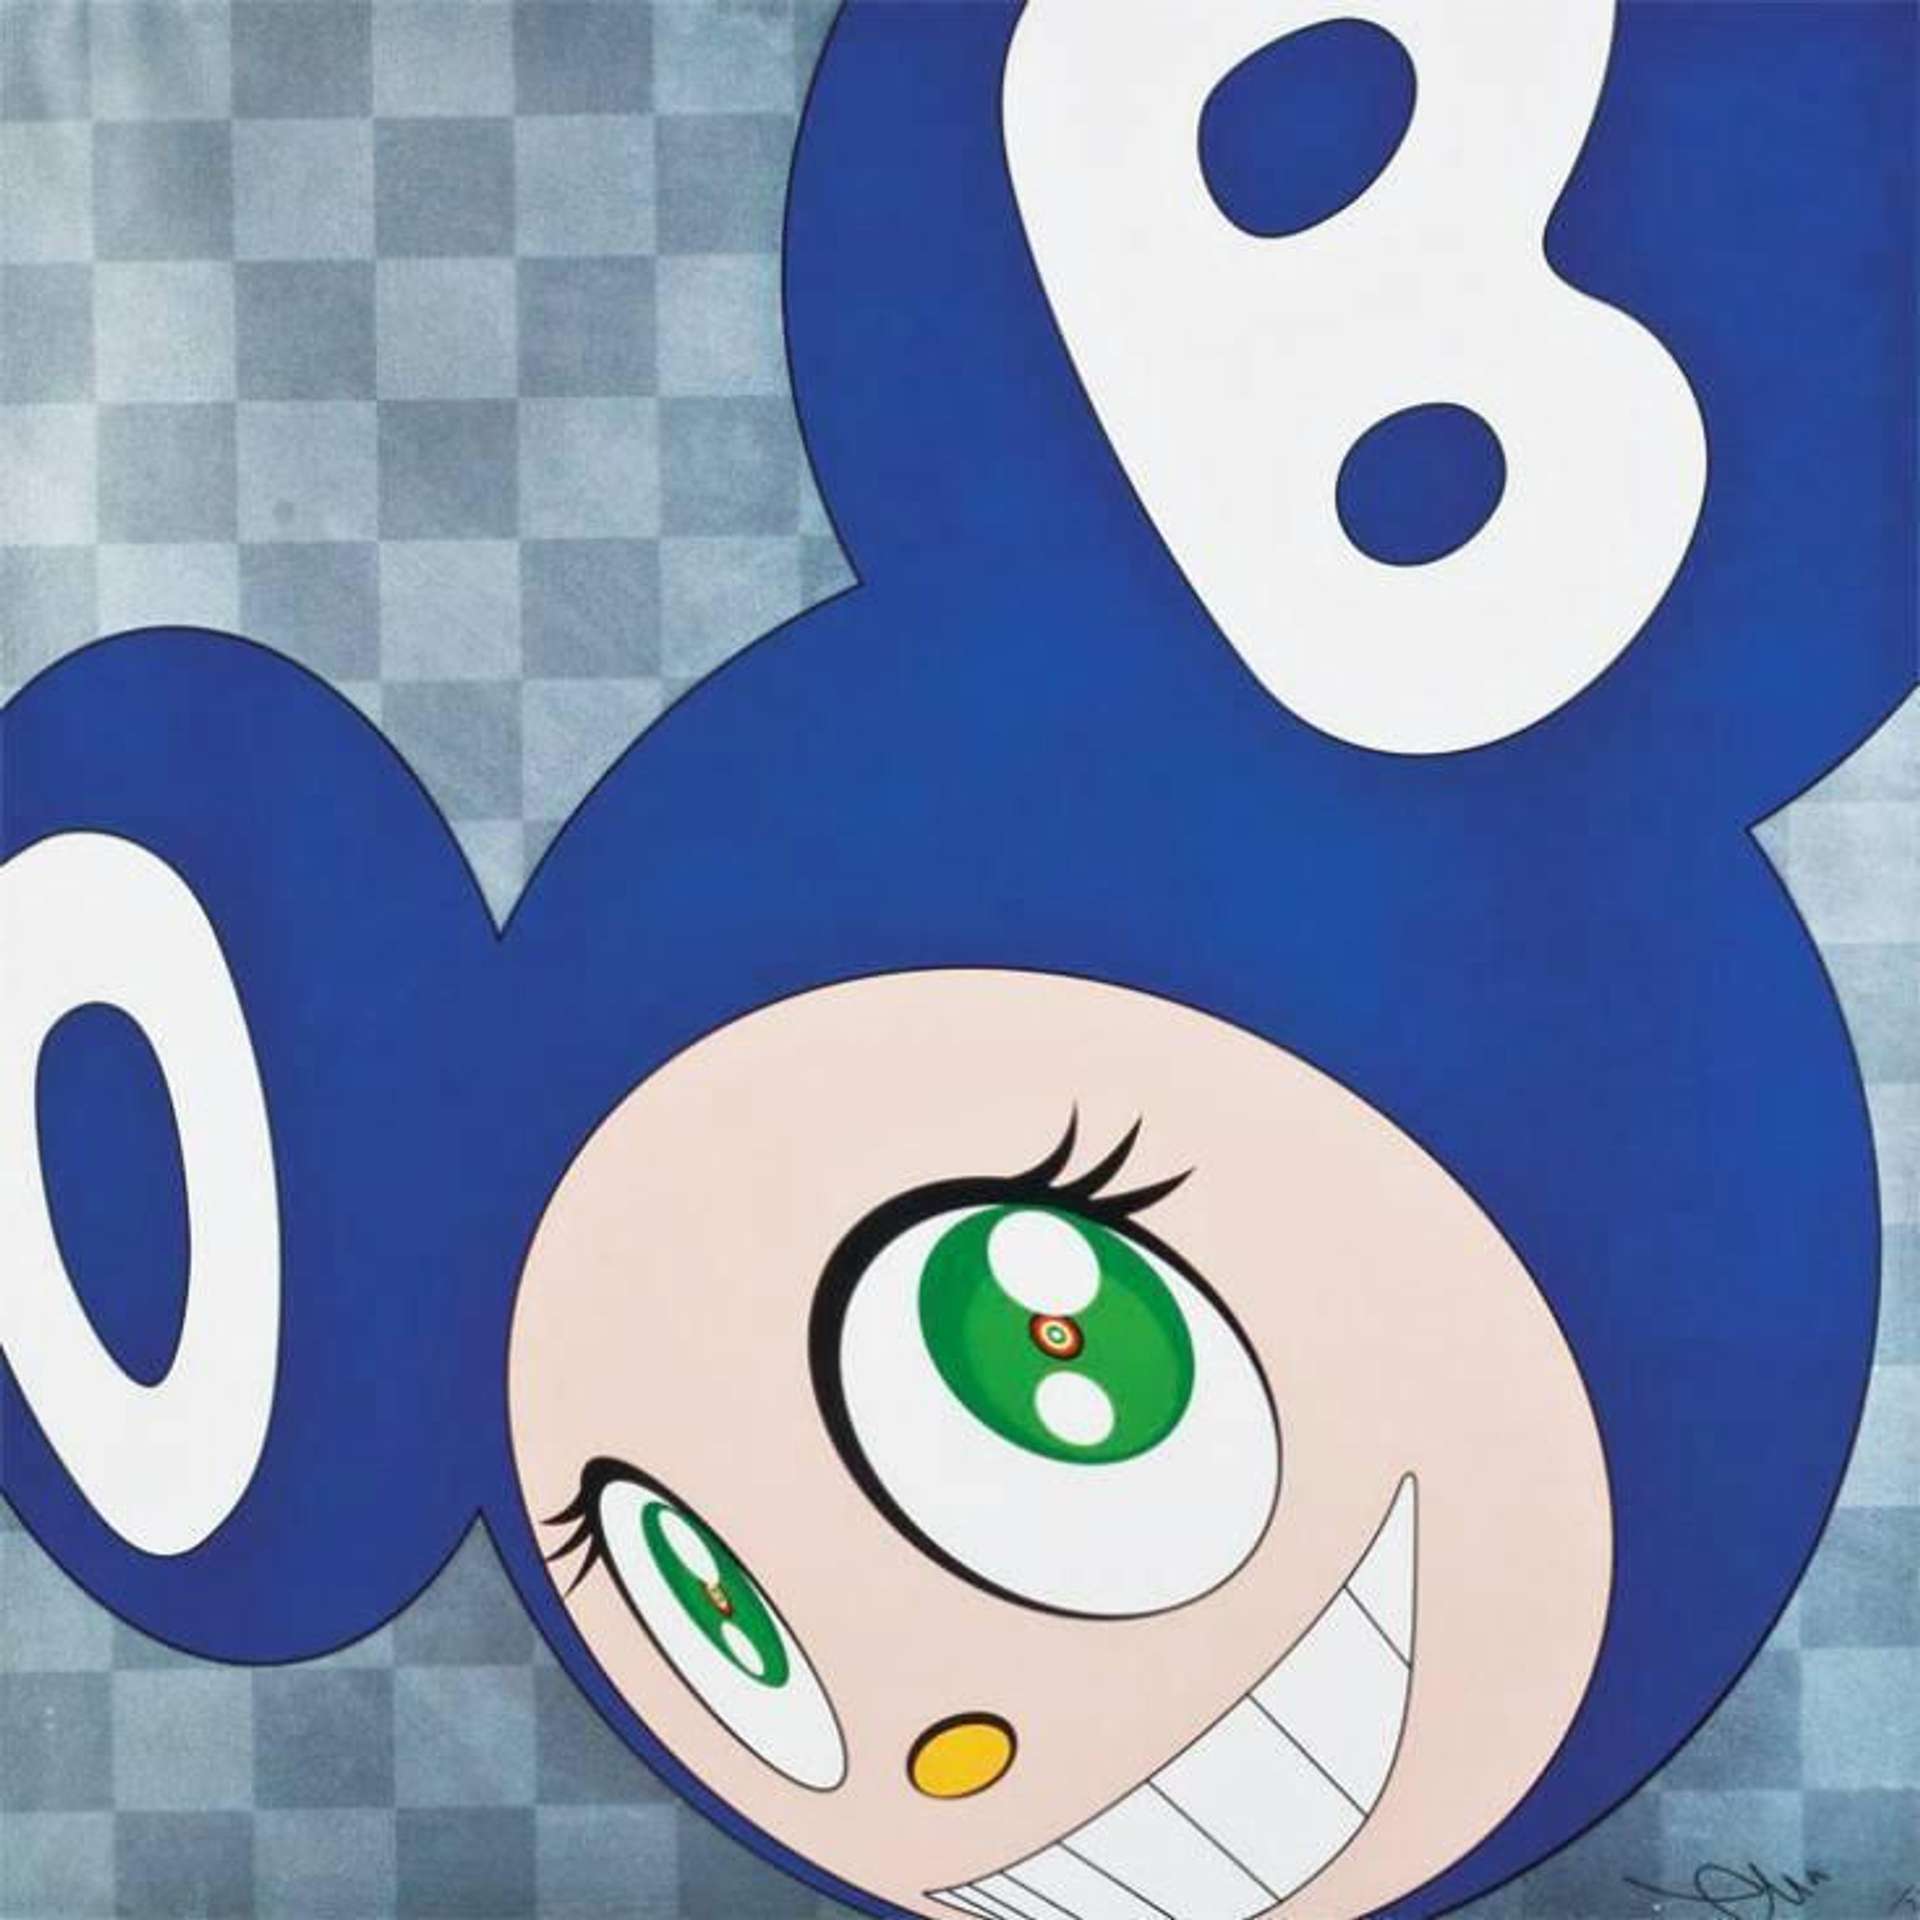 Takashi Murakami’s And Then And Then And Then And Then And Then (blue). A lithograph of an anime-style character with blue facial features against a chequered grey background. 